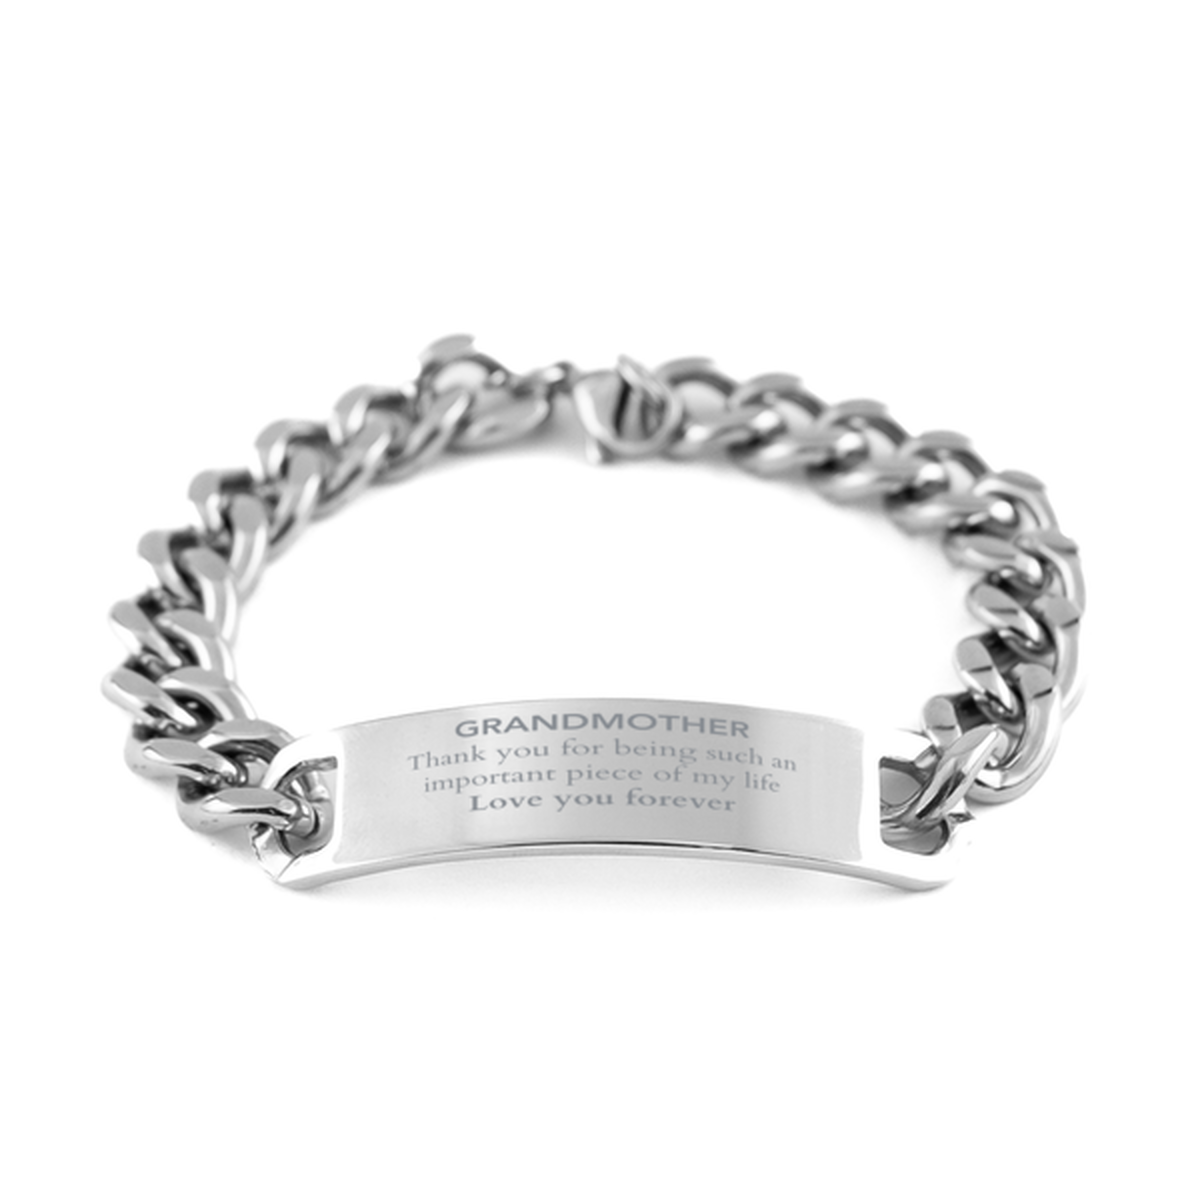 Appropriate Grandmother Cuban Chain Stainless Steel Bracelet Epic Birthday Gifts for Grandmother Thank you for being such an important piece of my life Grandmother Christmas Mothers Fathers Day